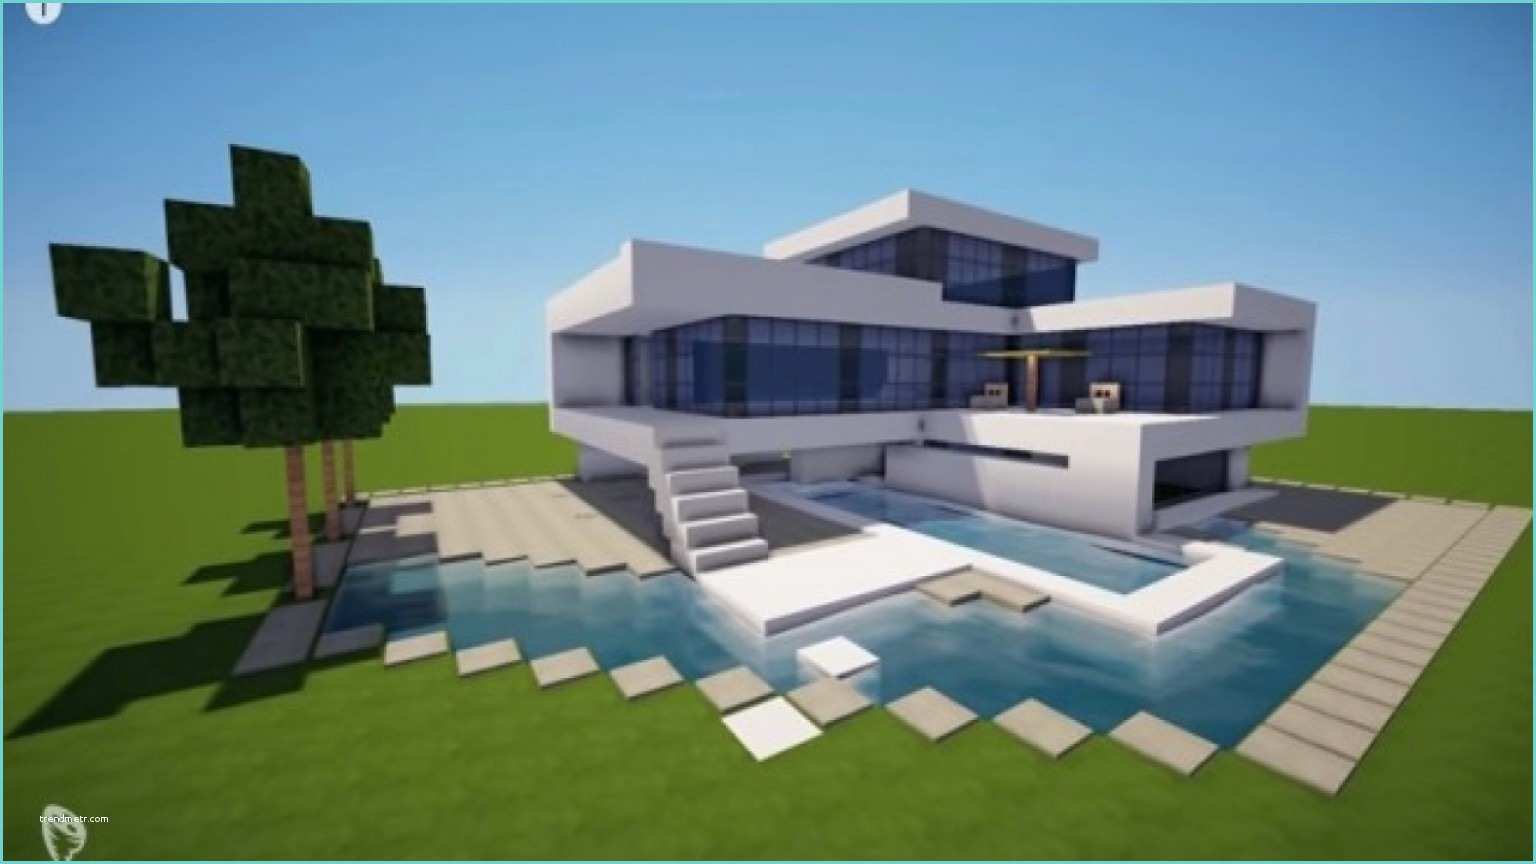 How to Build A Simple Modern House In Minecraft Pe How to Make A Modern House In Minecraft Pe 0 14 Best